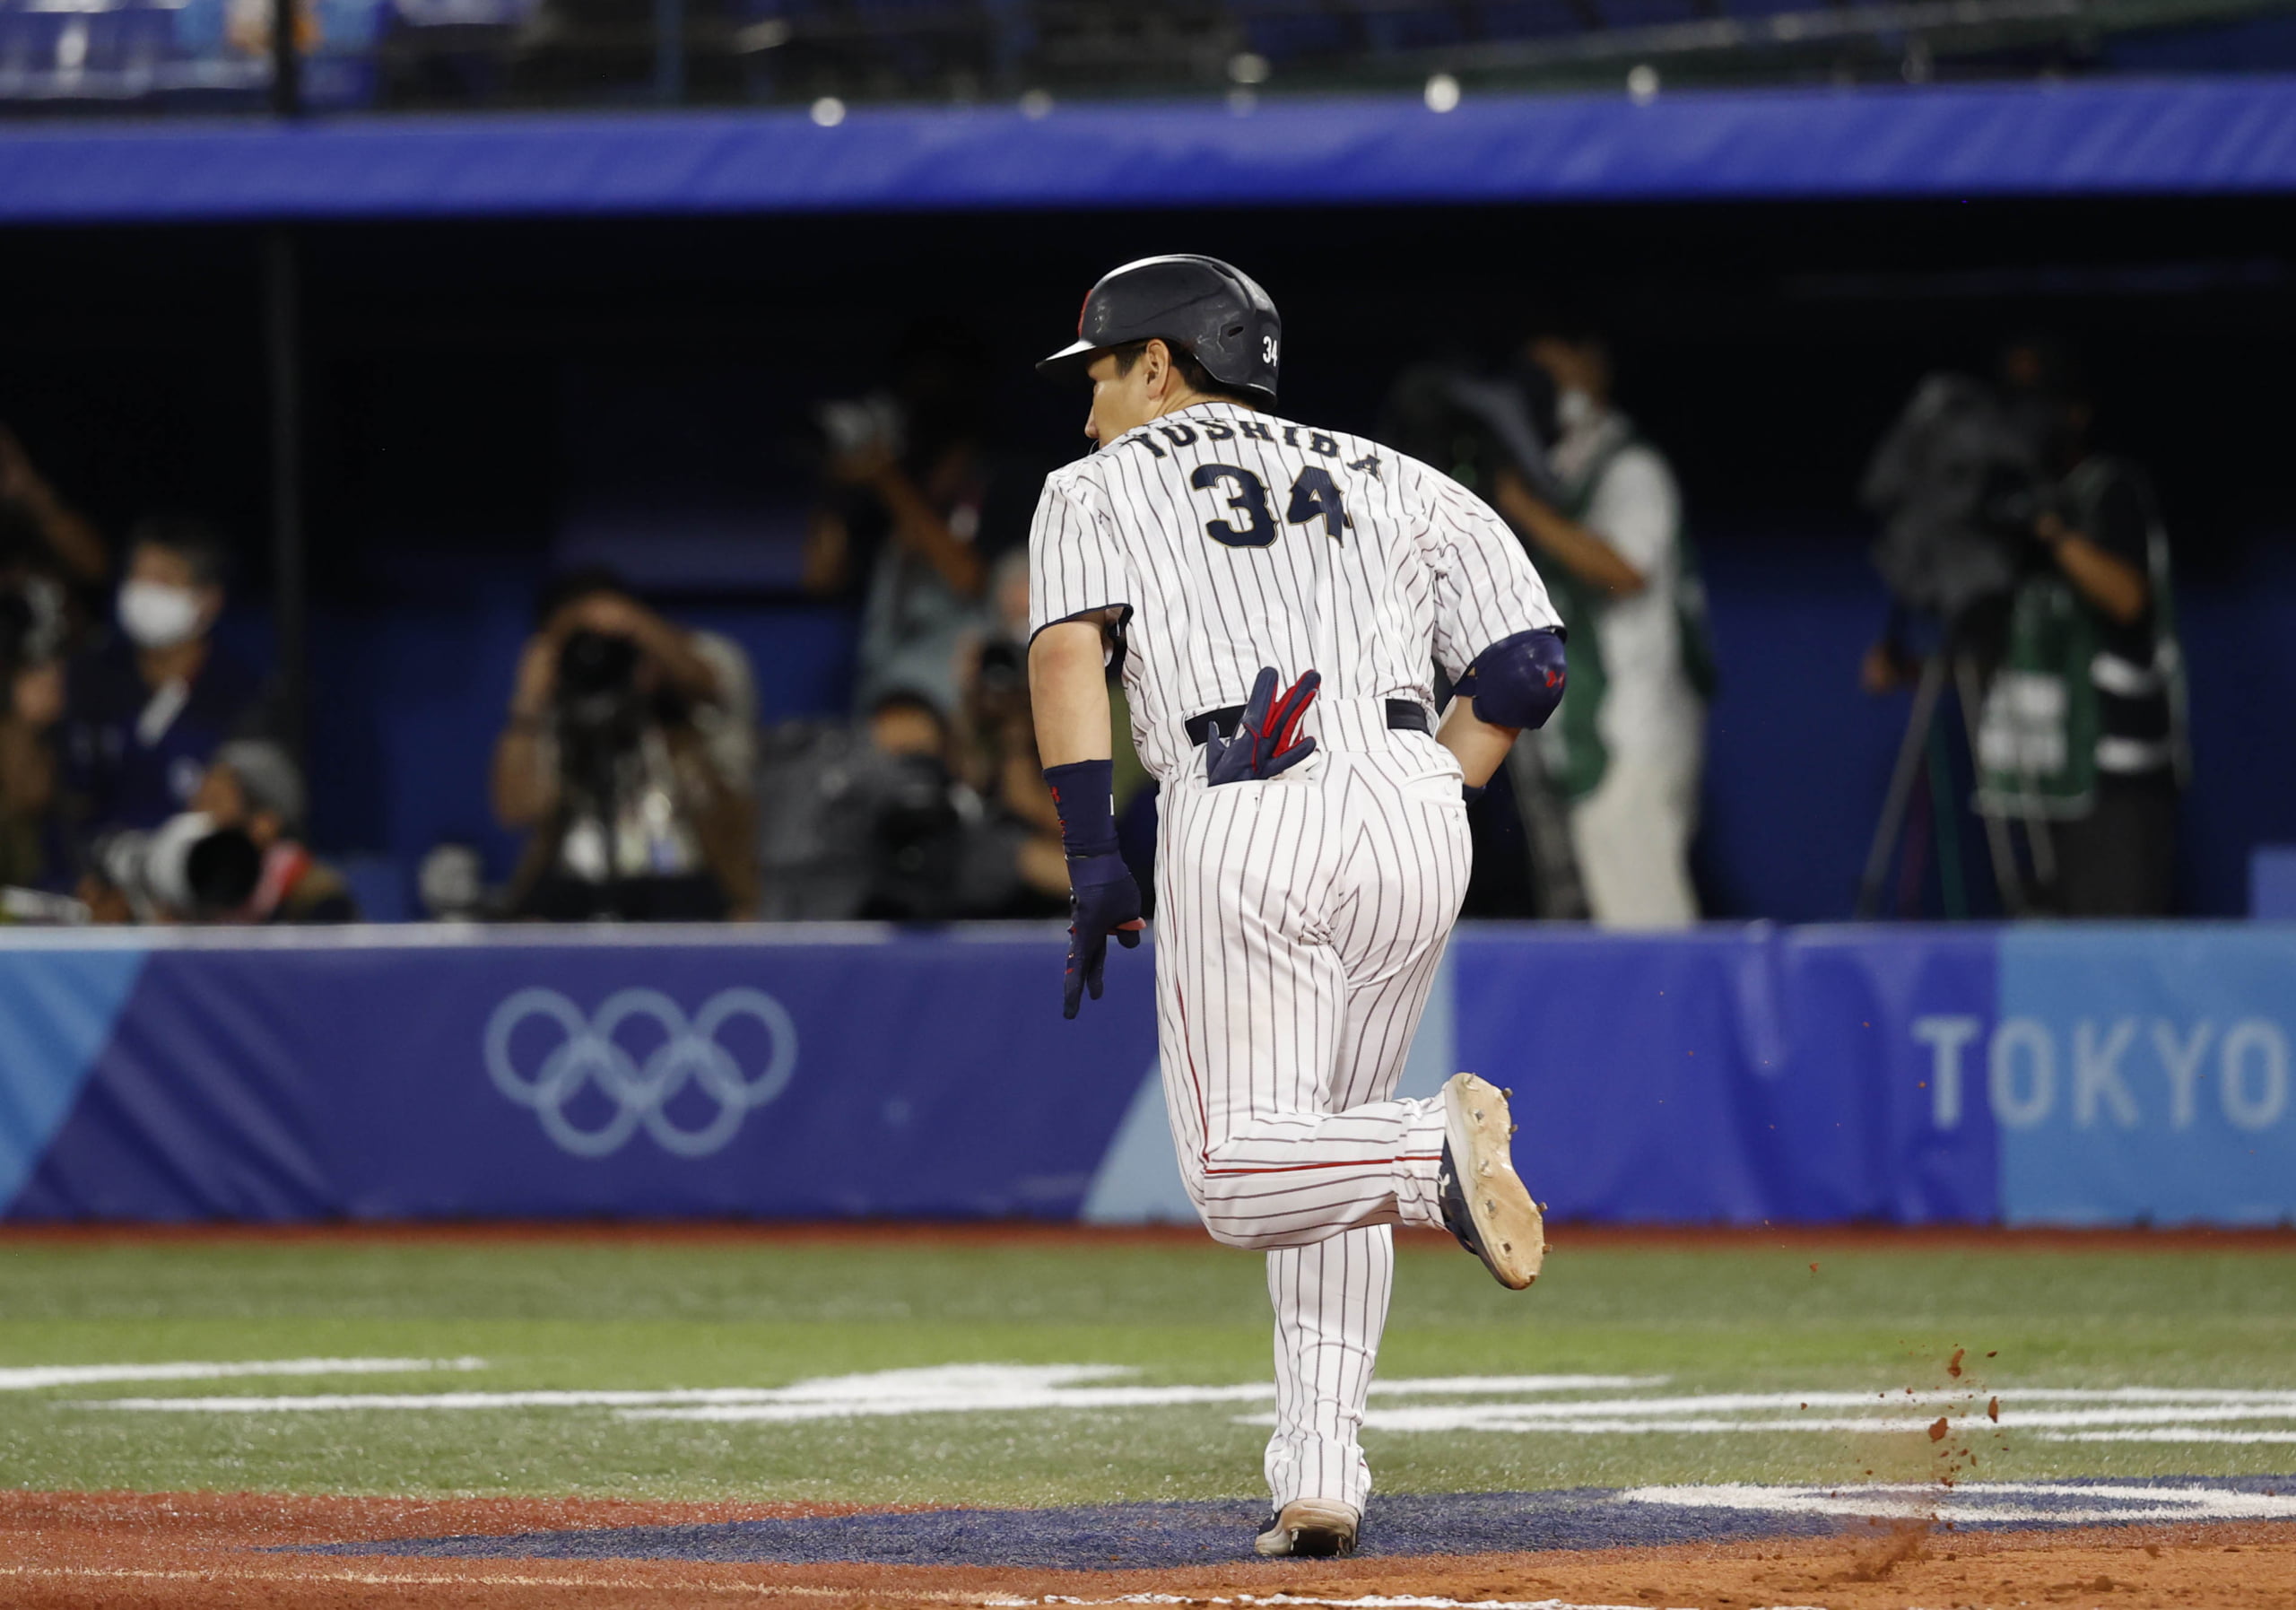 Yankees' Marwin González replaces Red Sox LF in Japan in logical